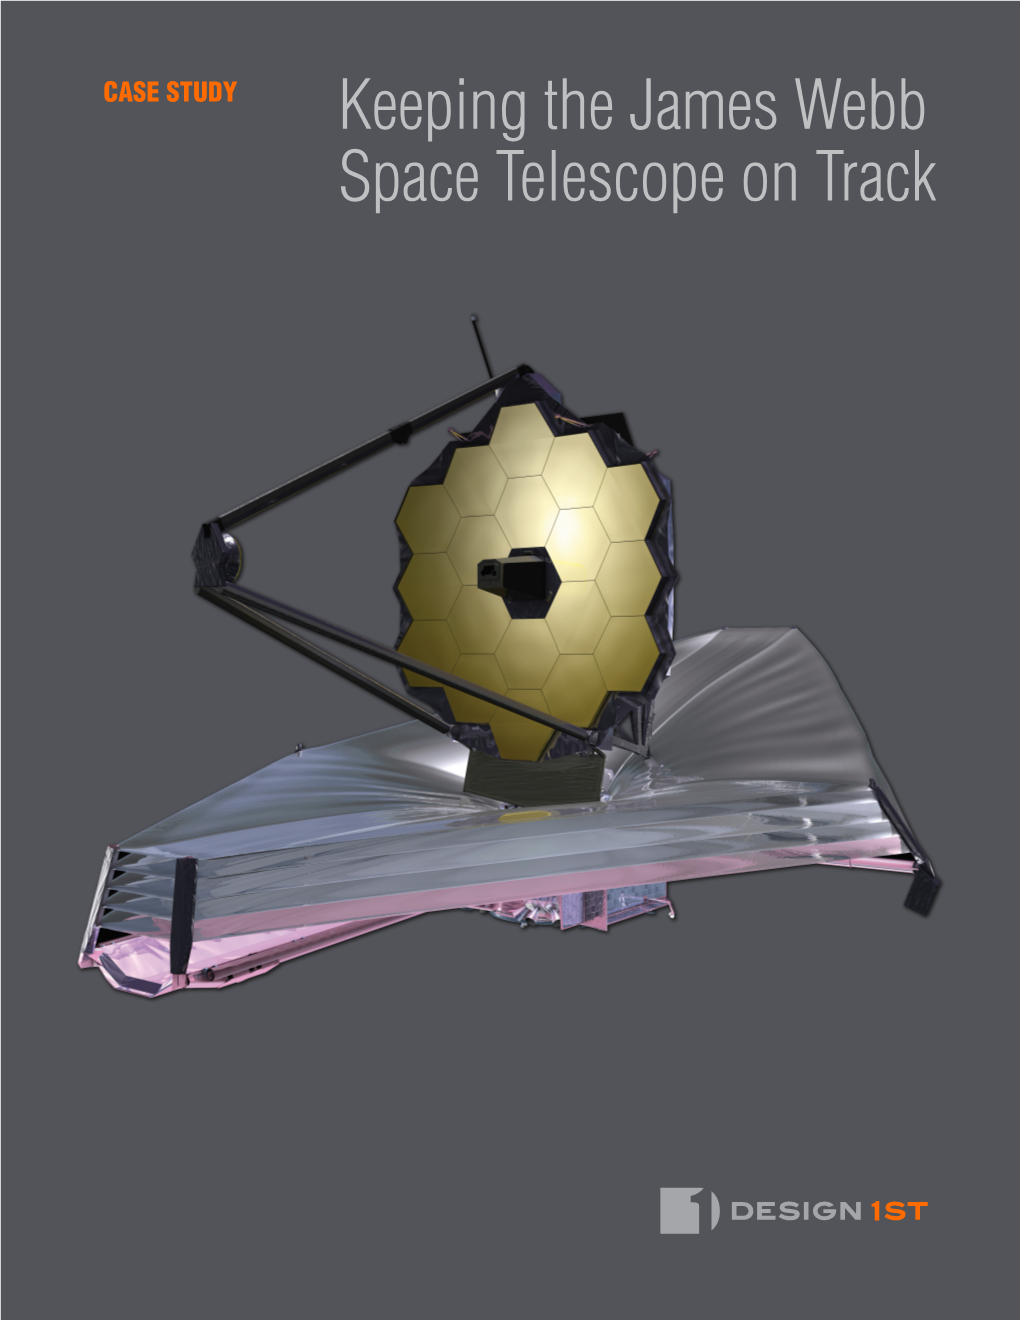 Keeping the James Webb Space Telescope on Track